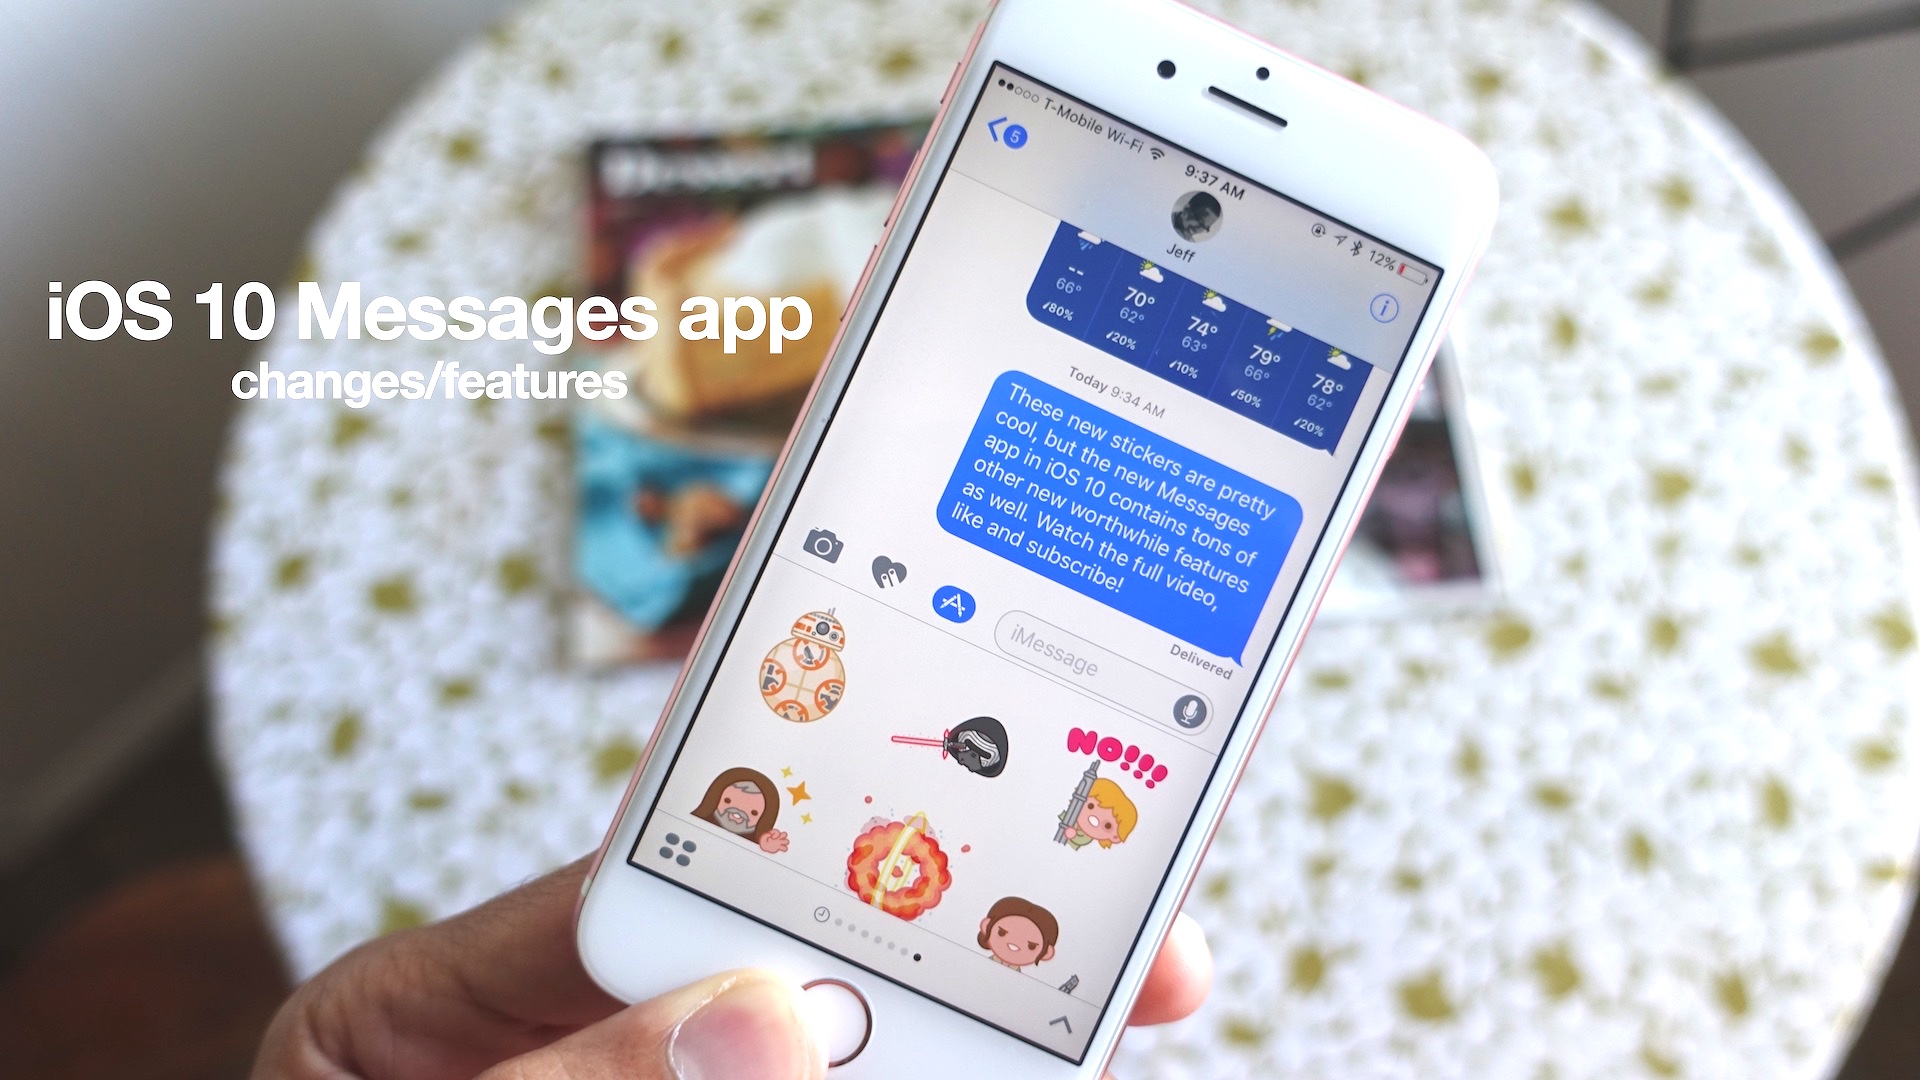 iOS 10: How to use stickers, iMessages apps, Digital Touch, rich links, and  more in the new Messages app [Video] - 9to5Mac